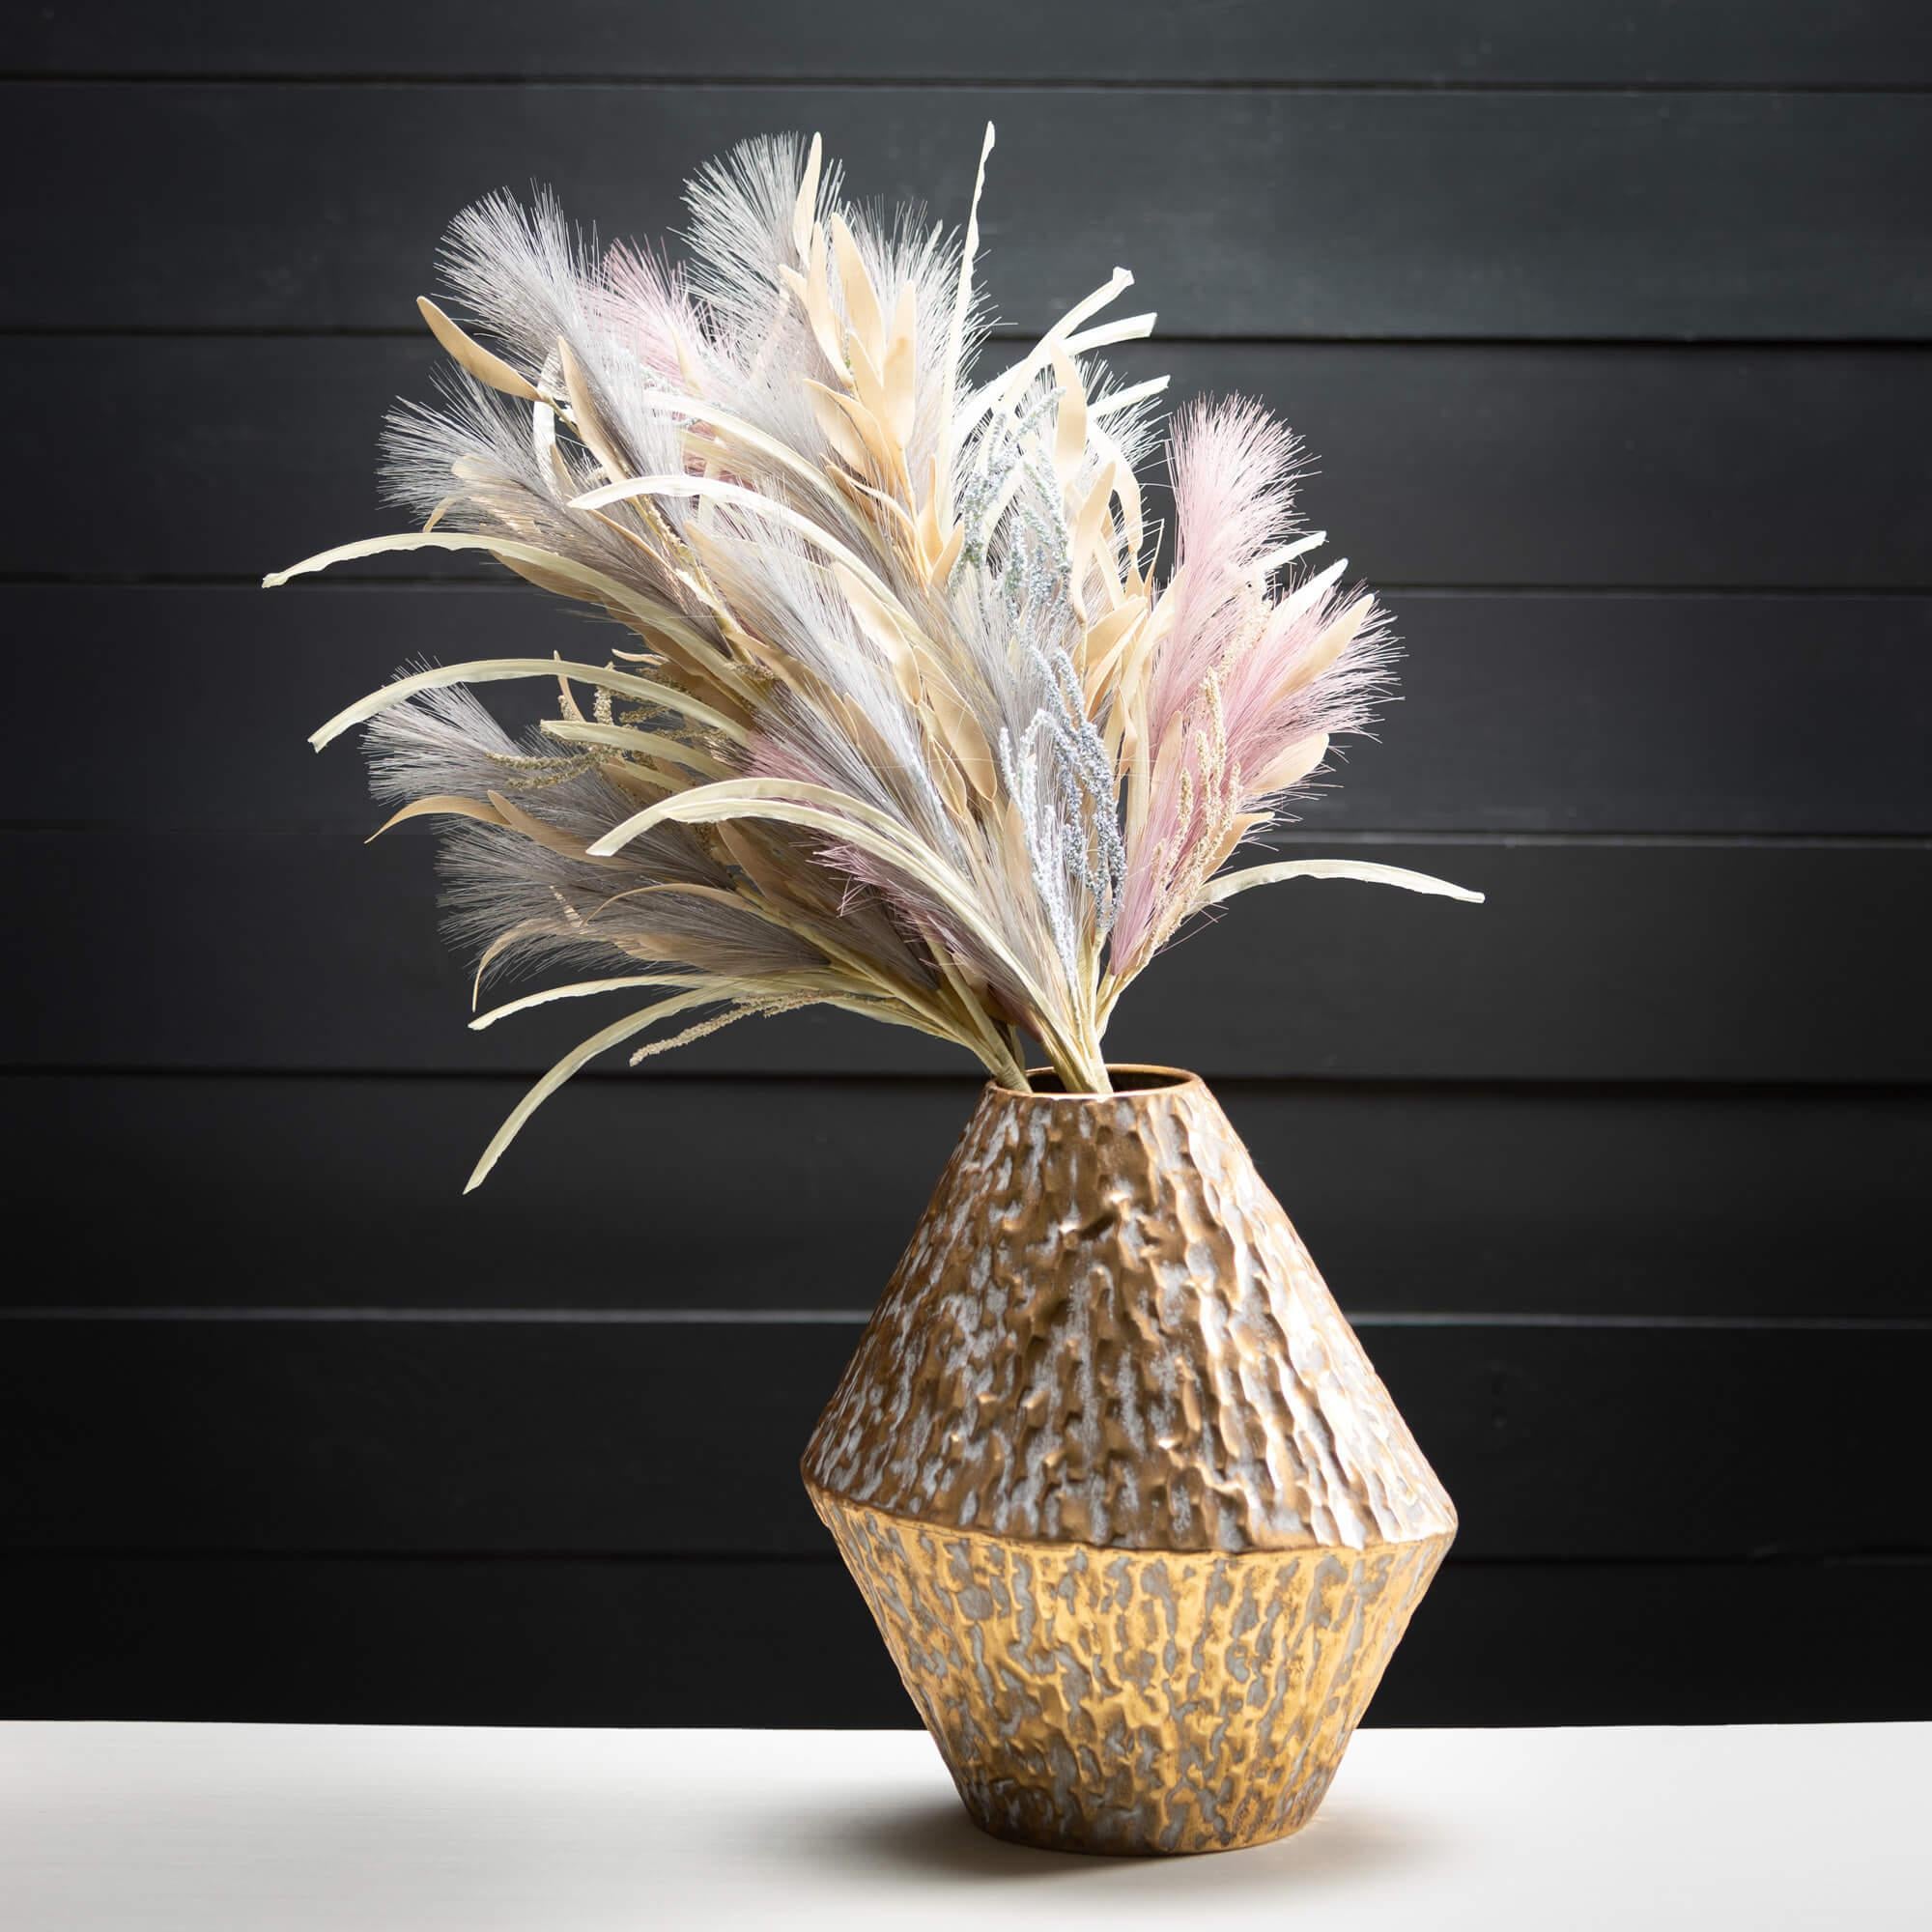 Twilight Feather Plume Grass - 32"H